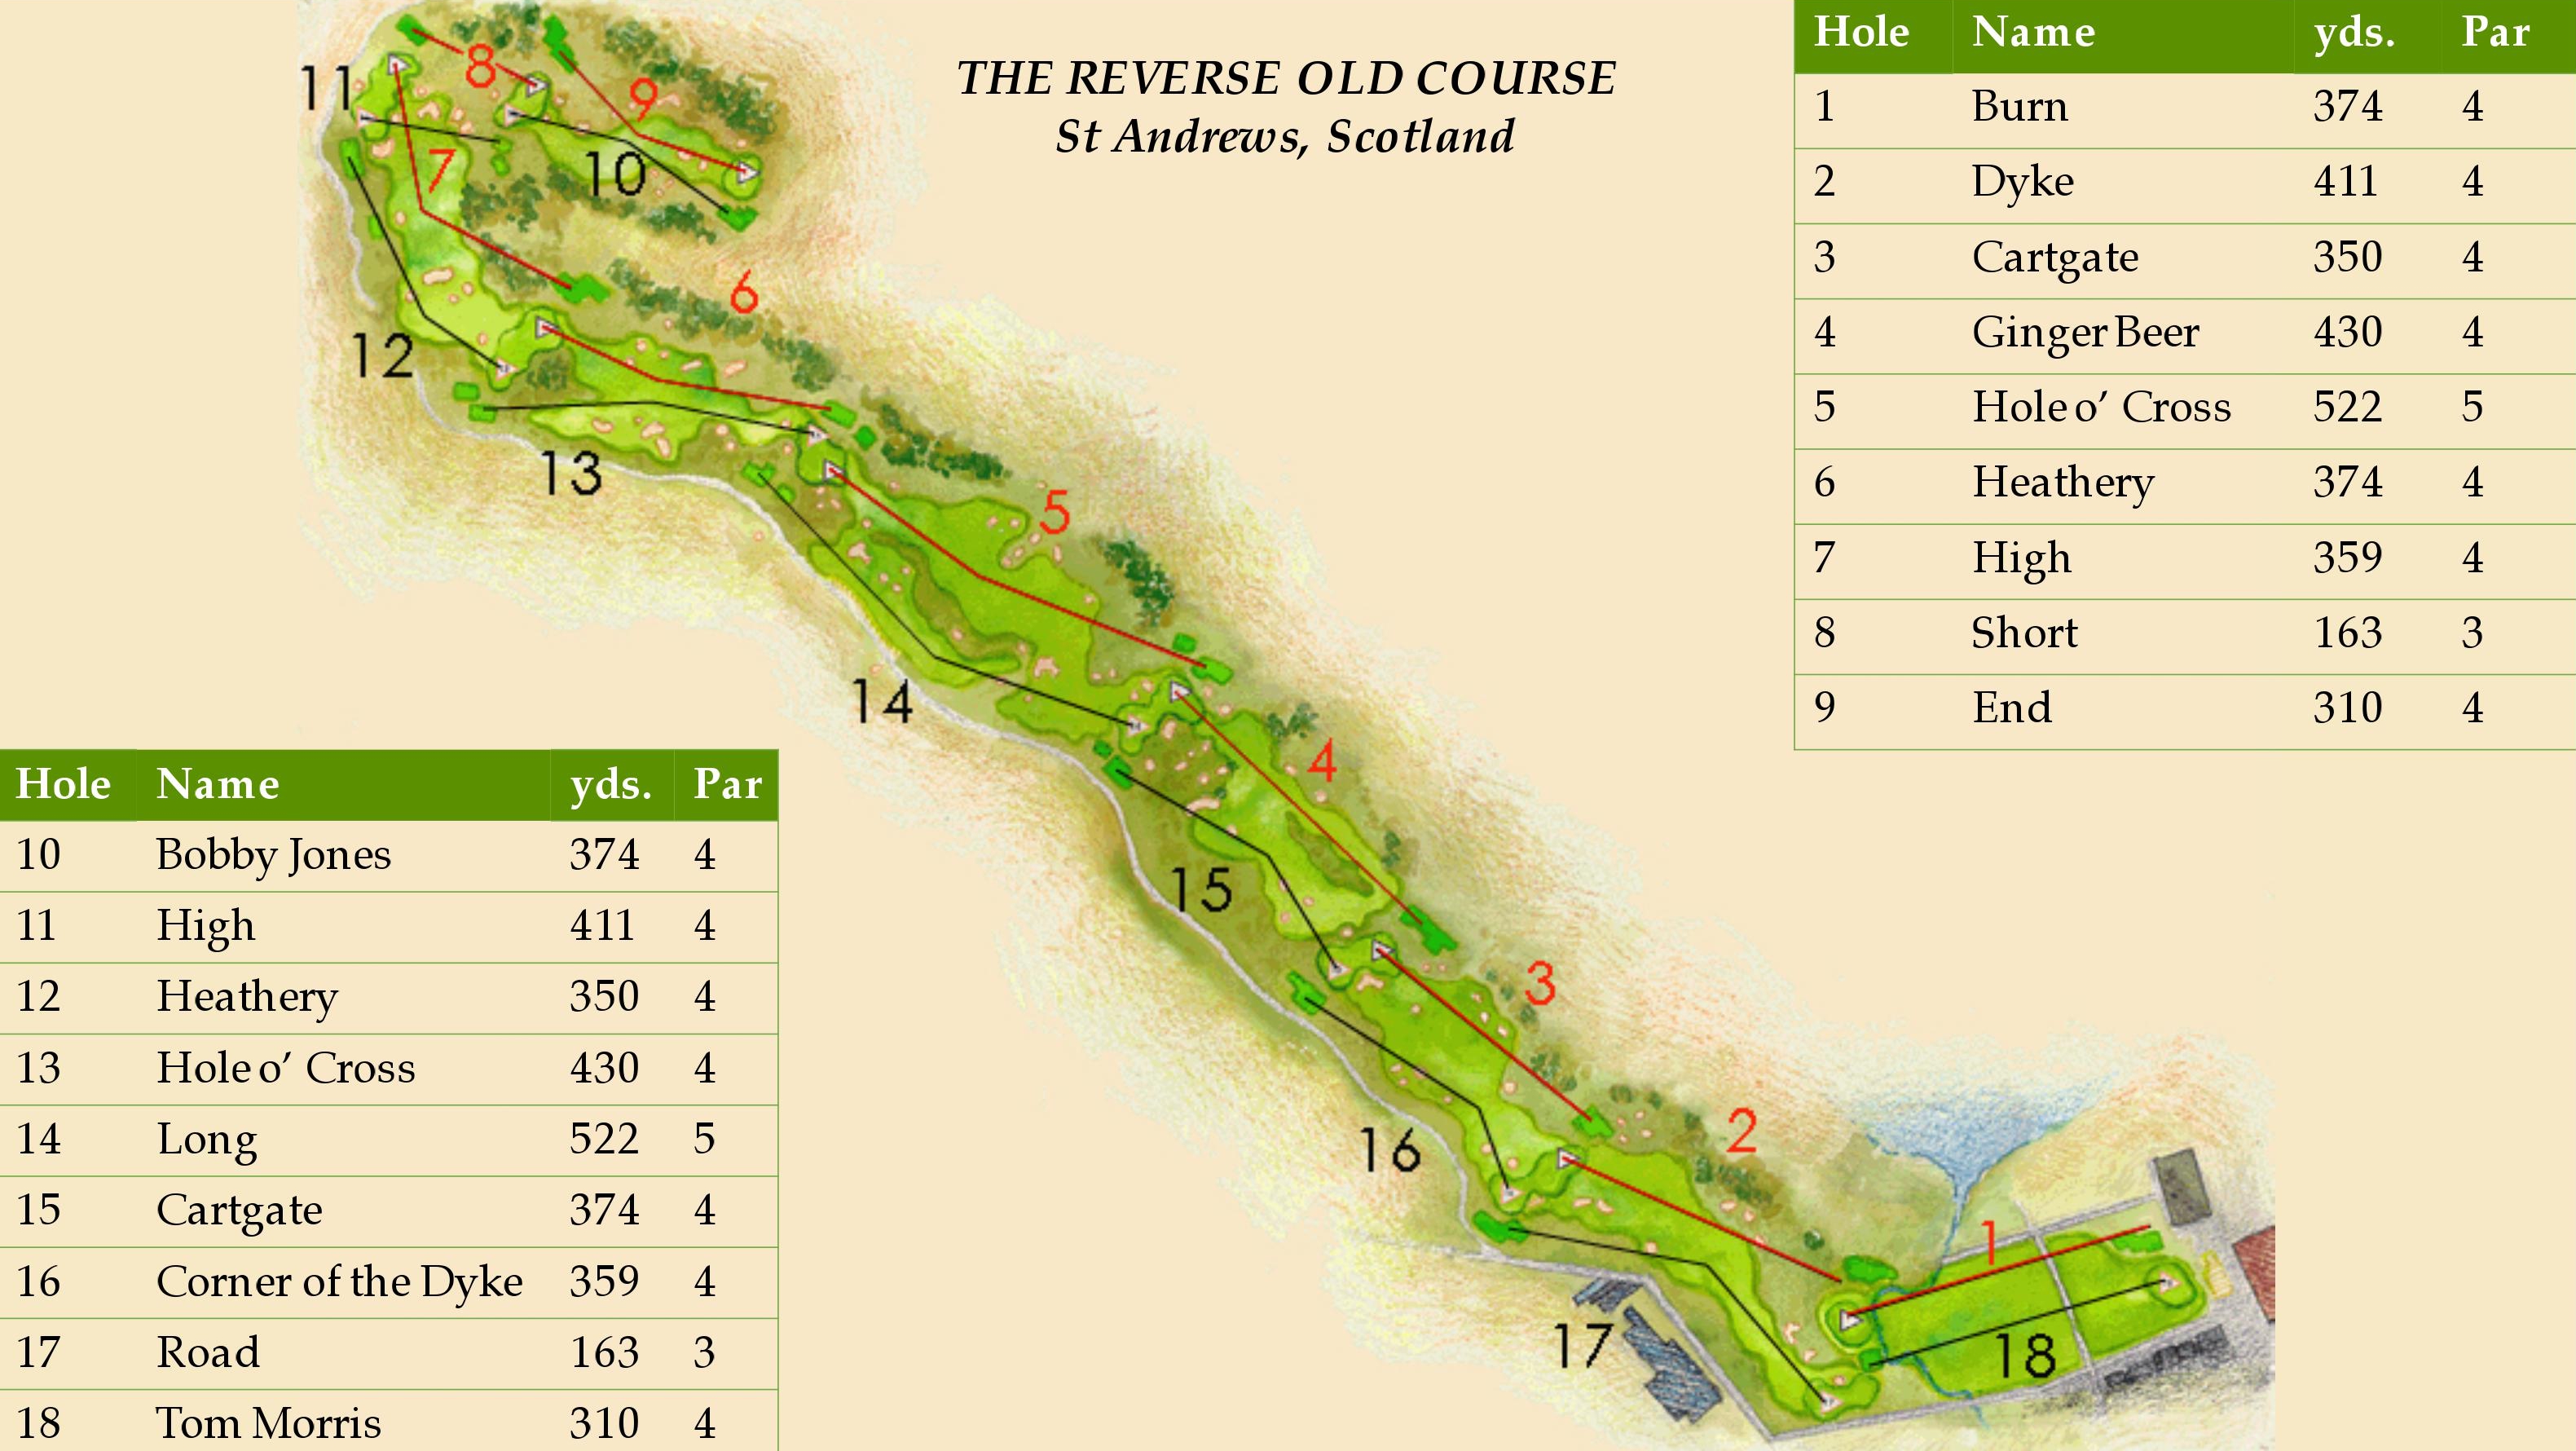 Image map of the Old Course